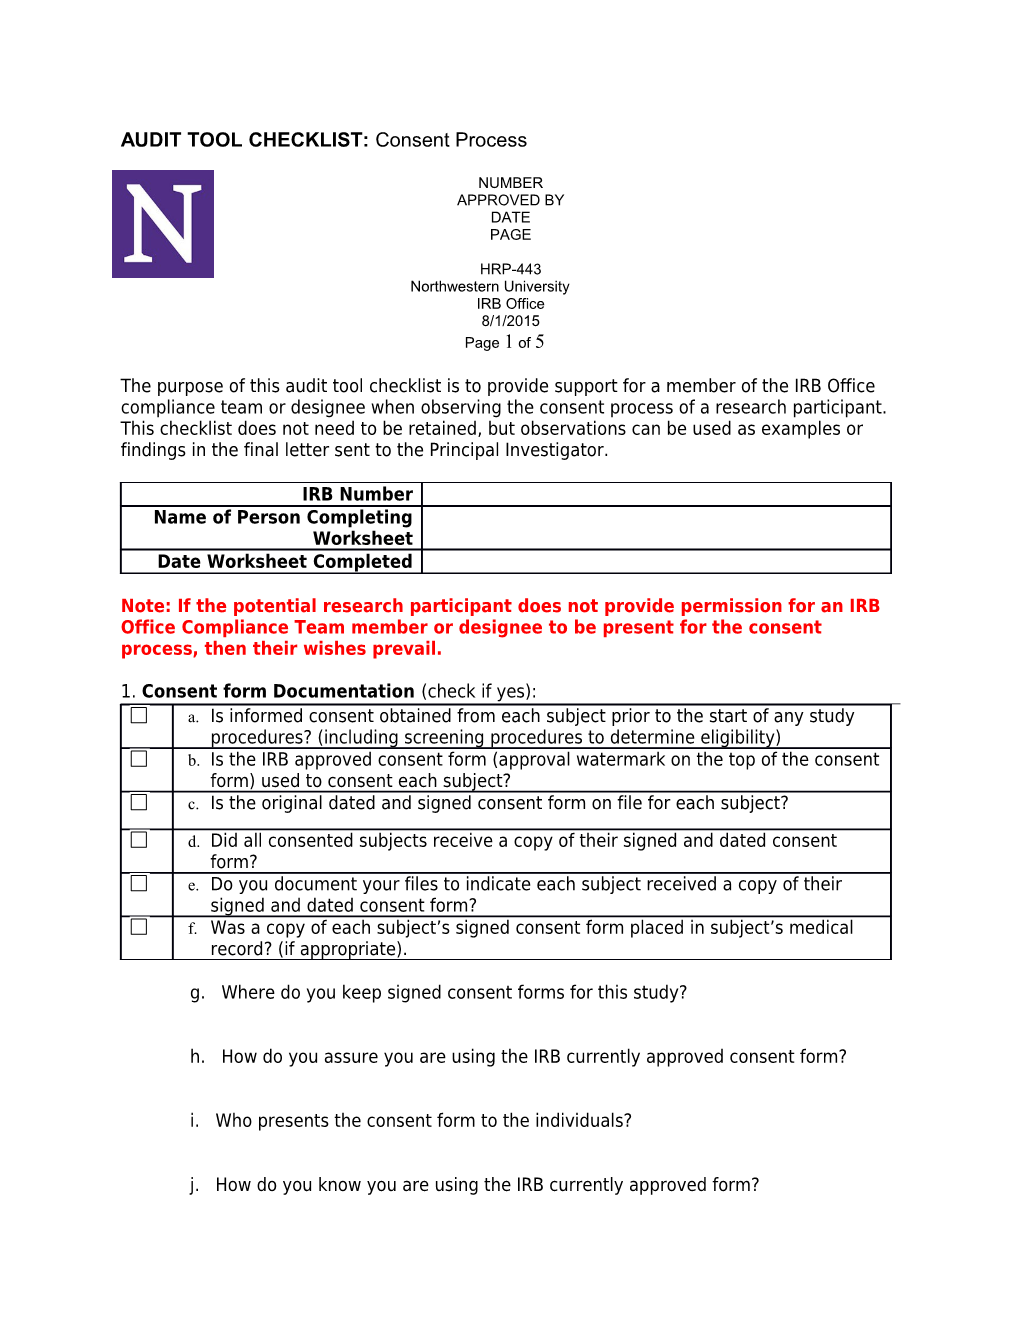 1. Consent Form Documentation (Check If Yes)